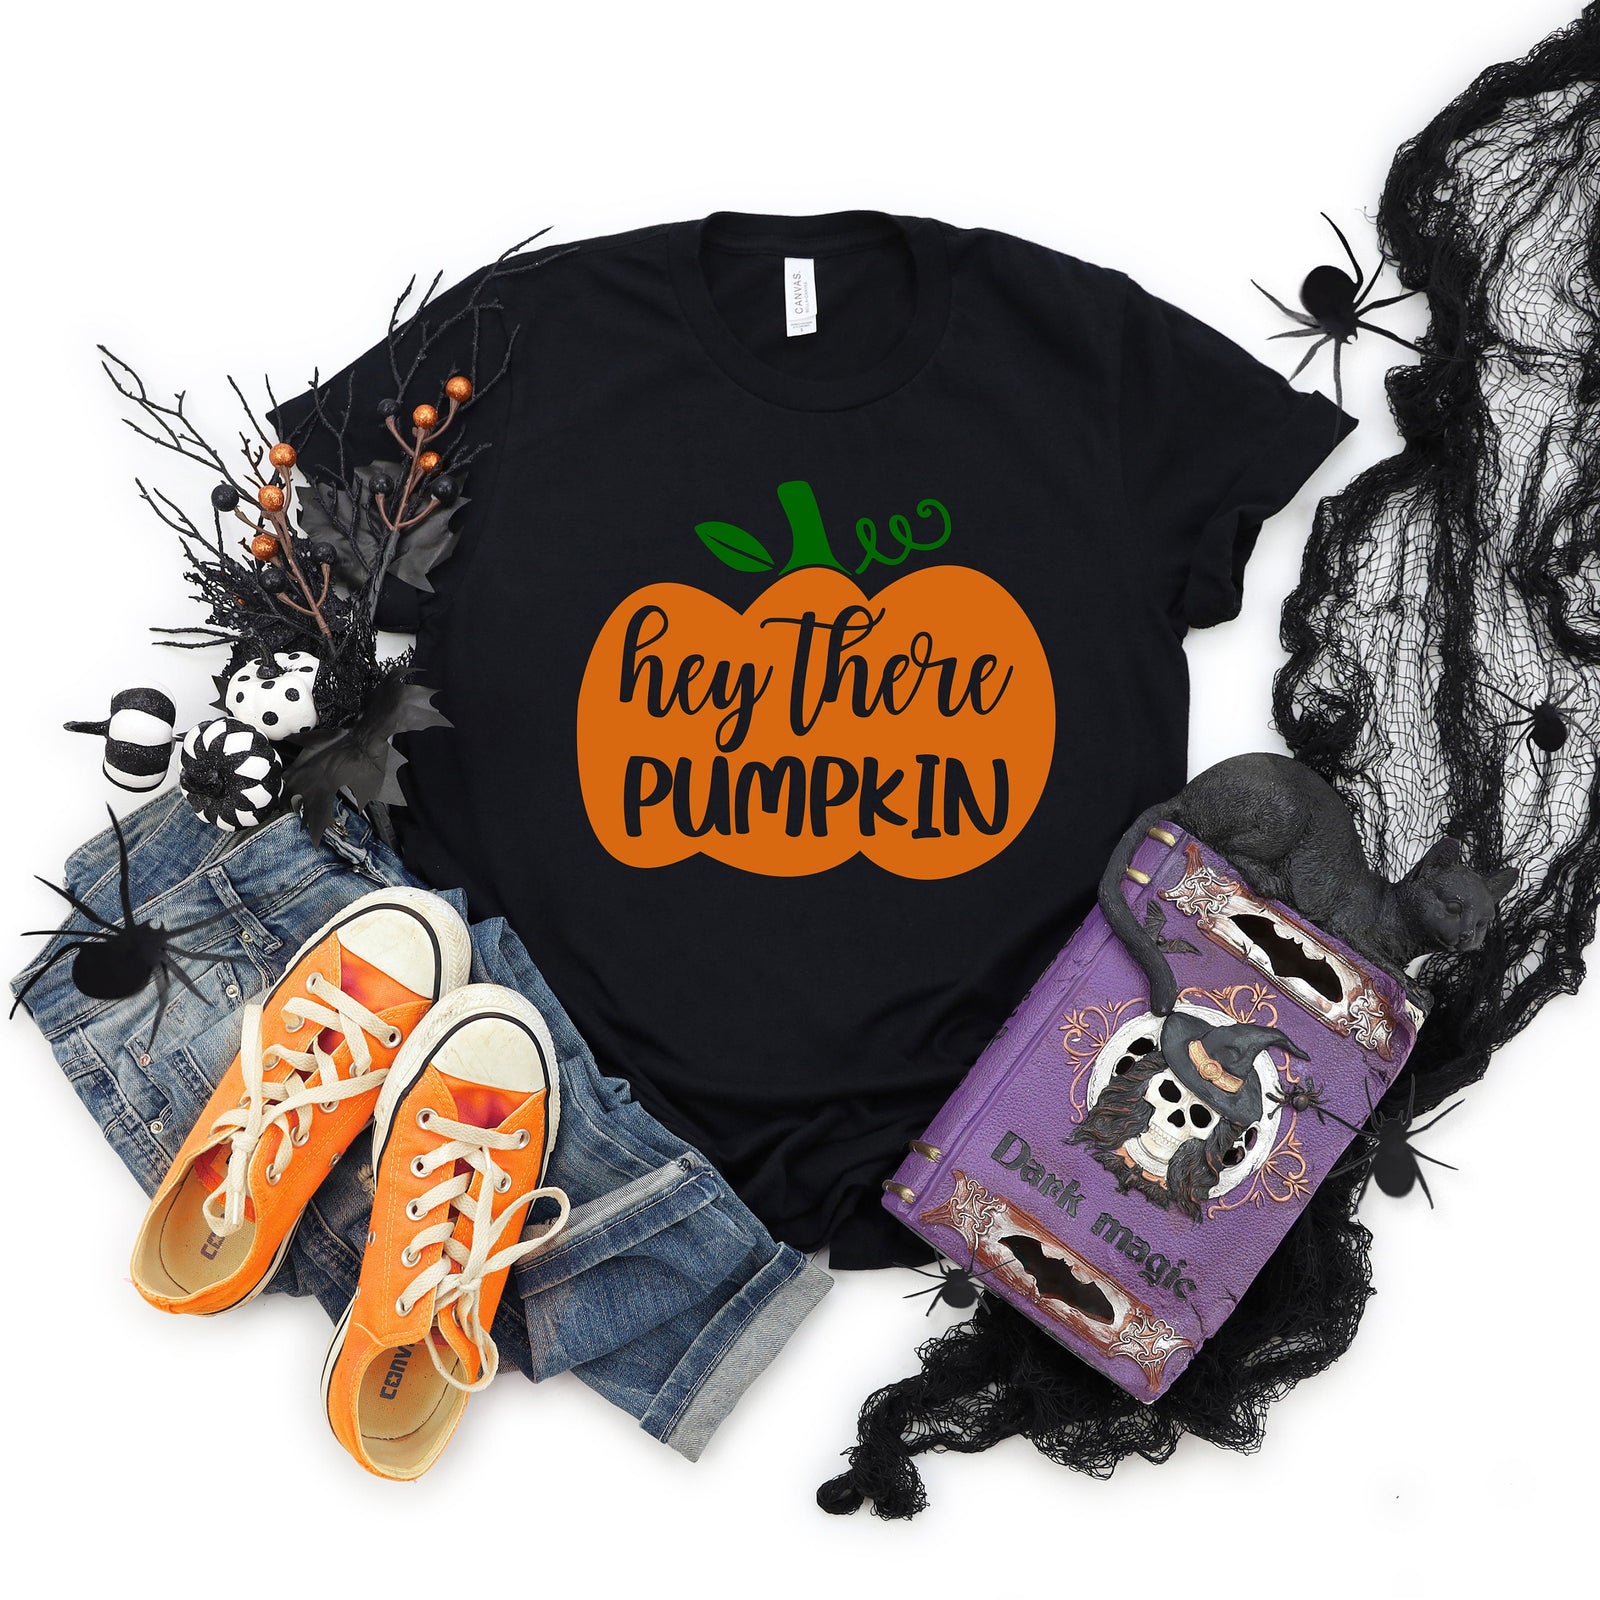 Hey There Pumpkin Love  Adult T Shirt - Halloween - Office - School -  - Fun Not So Scary